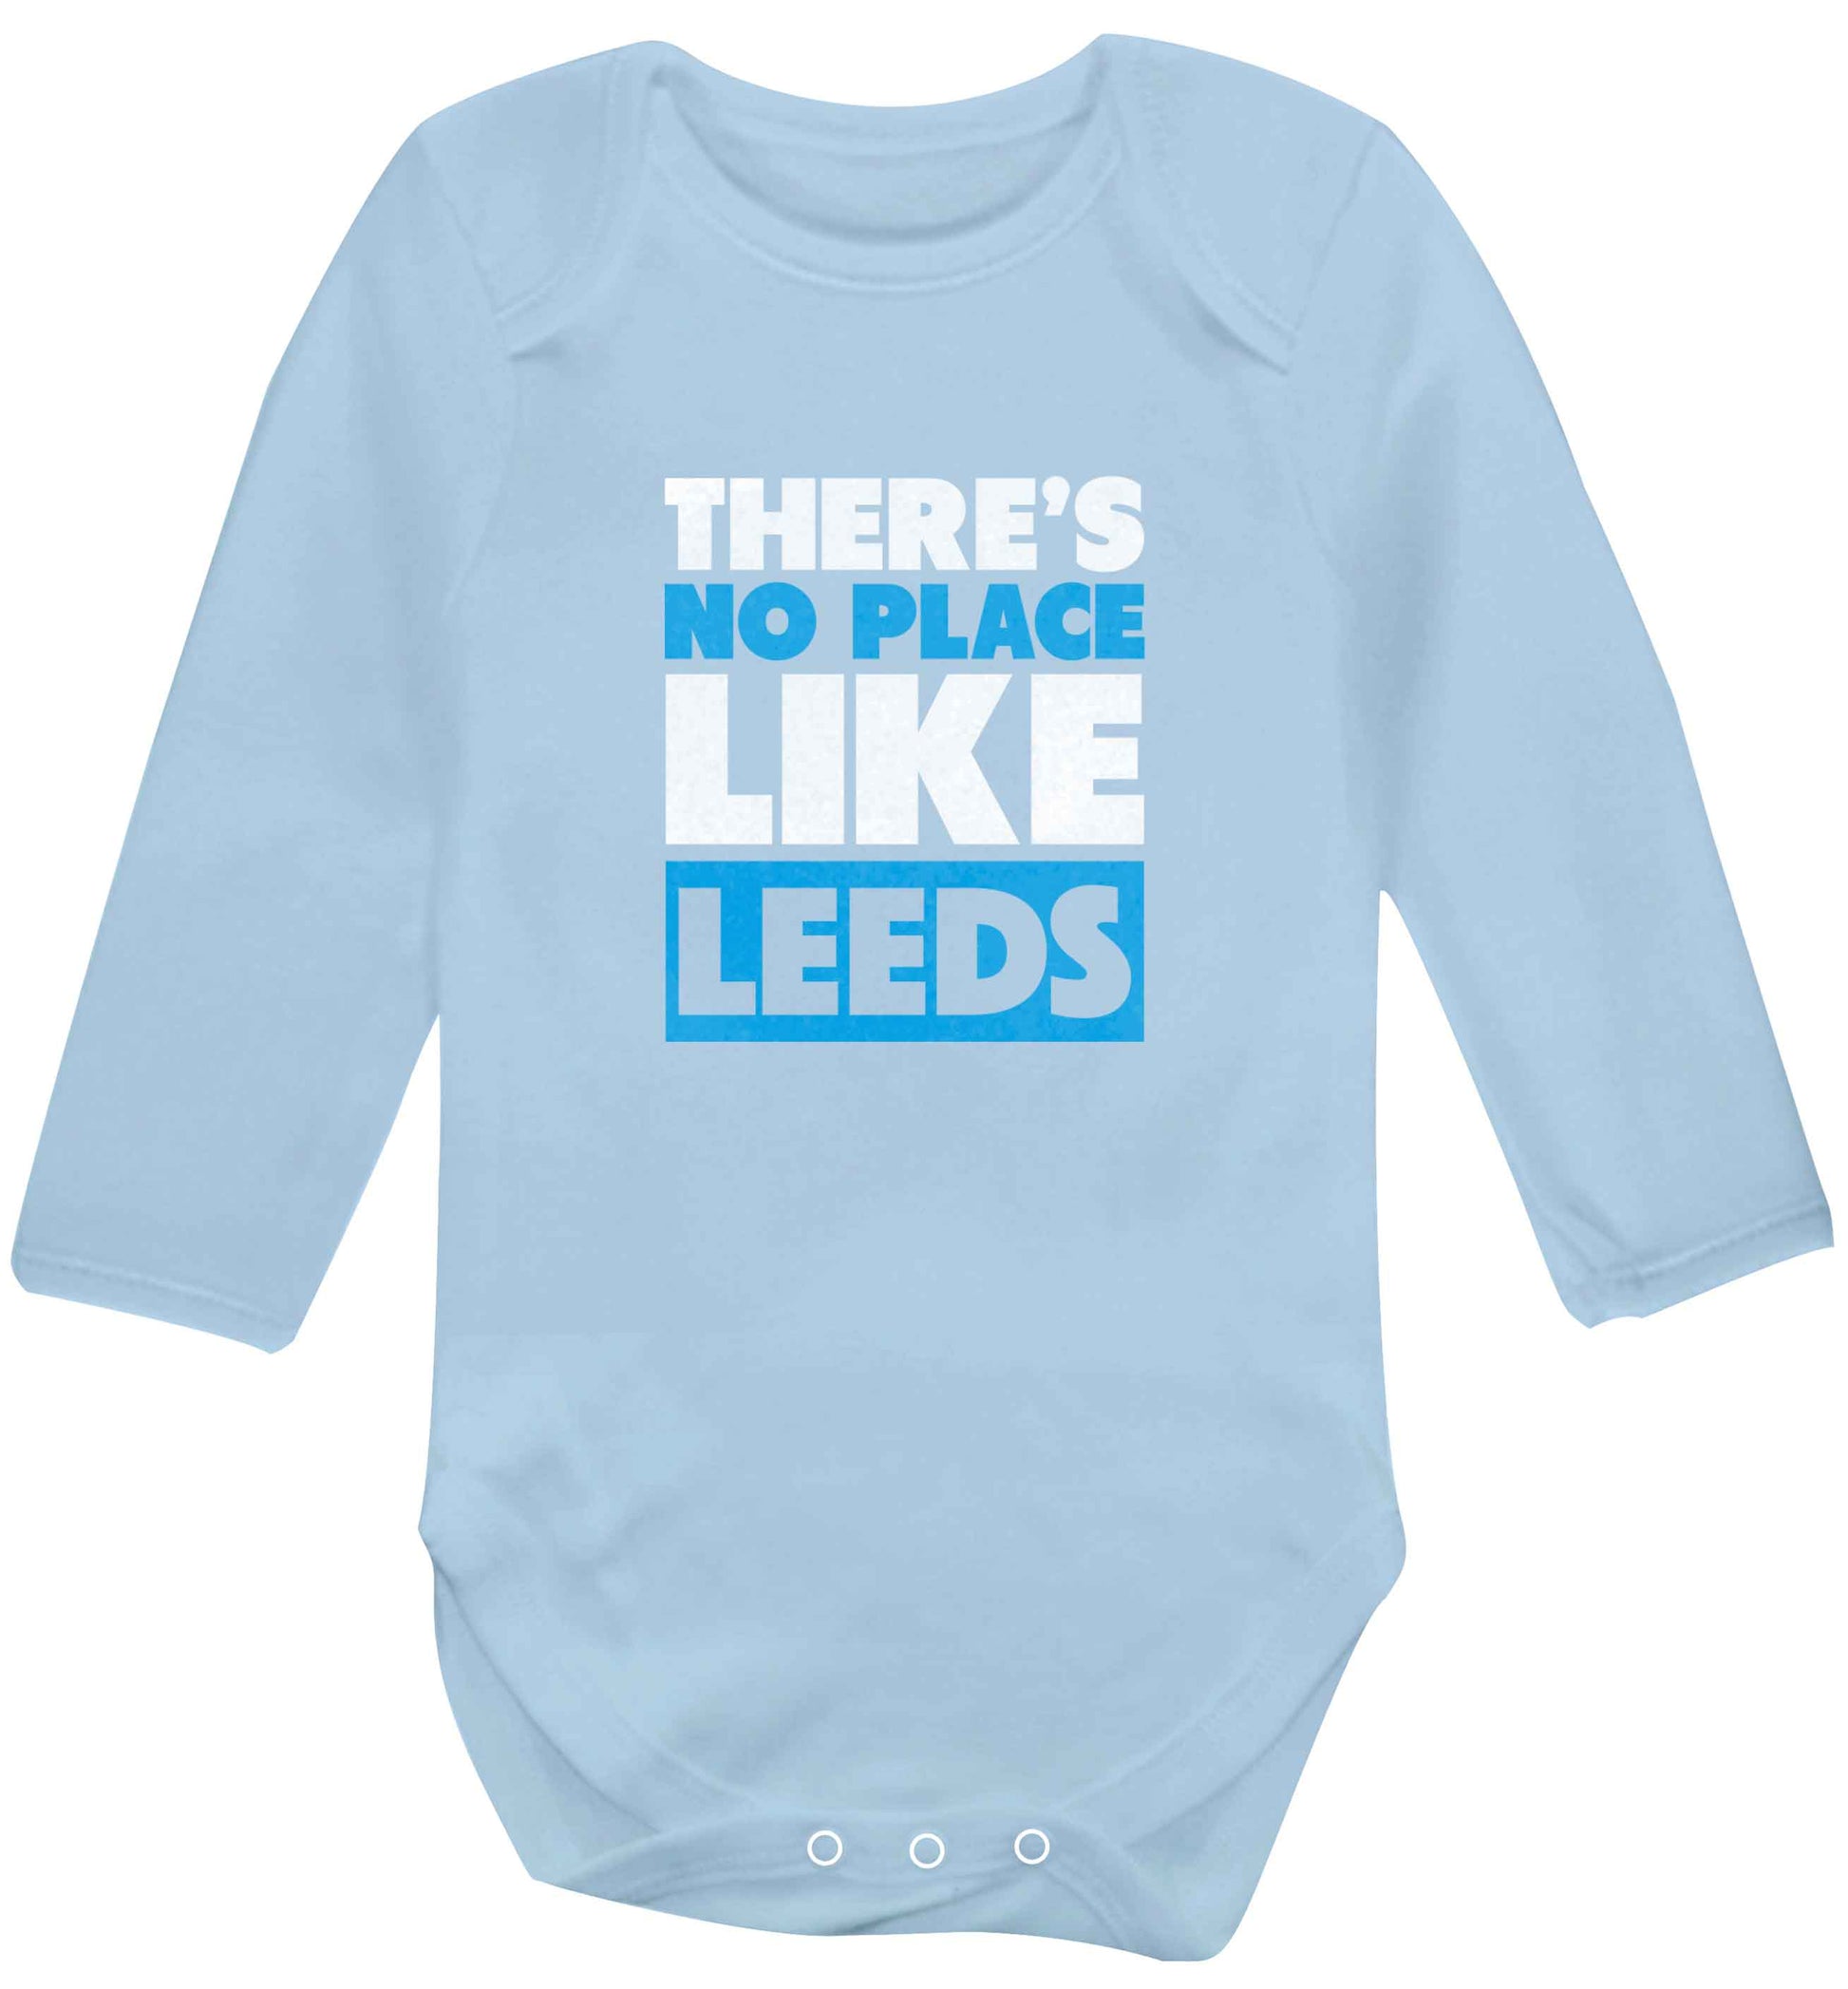 There's no place like Leeds baby vest long sleeved pale blue 6-12 months